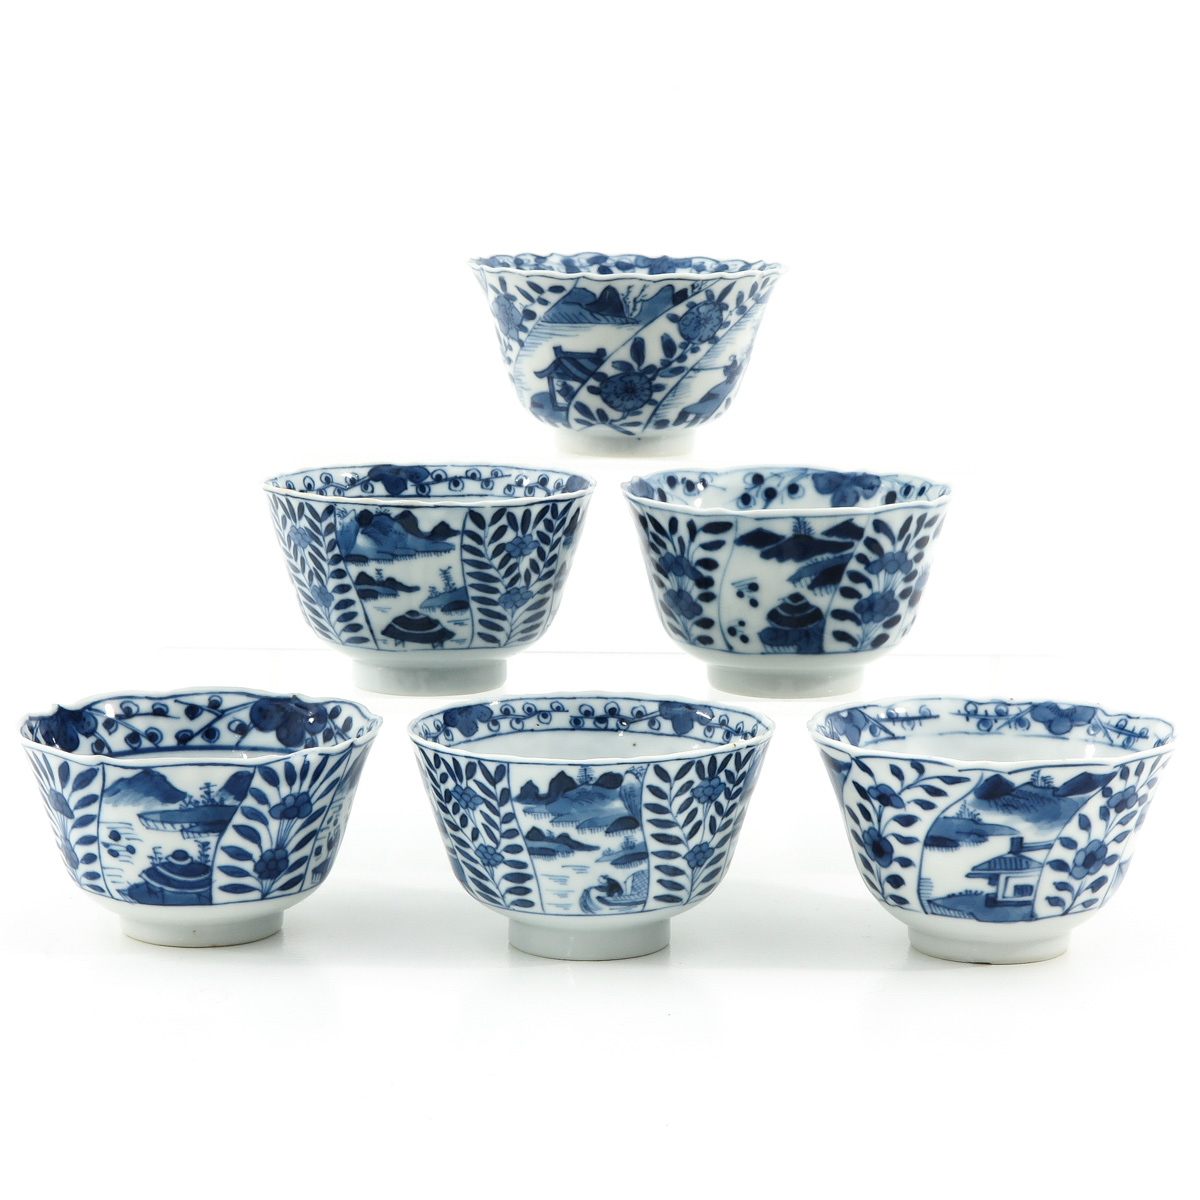 A Set of 6 Cups and Saucers - Image 4 of 10